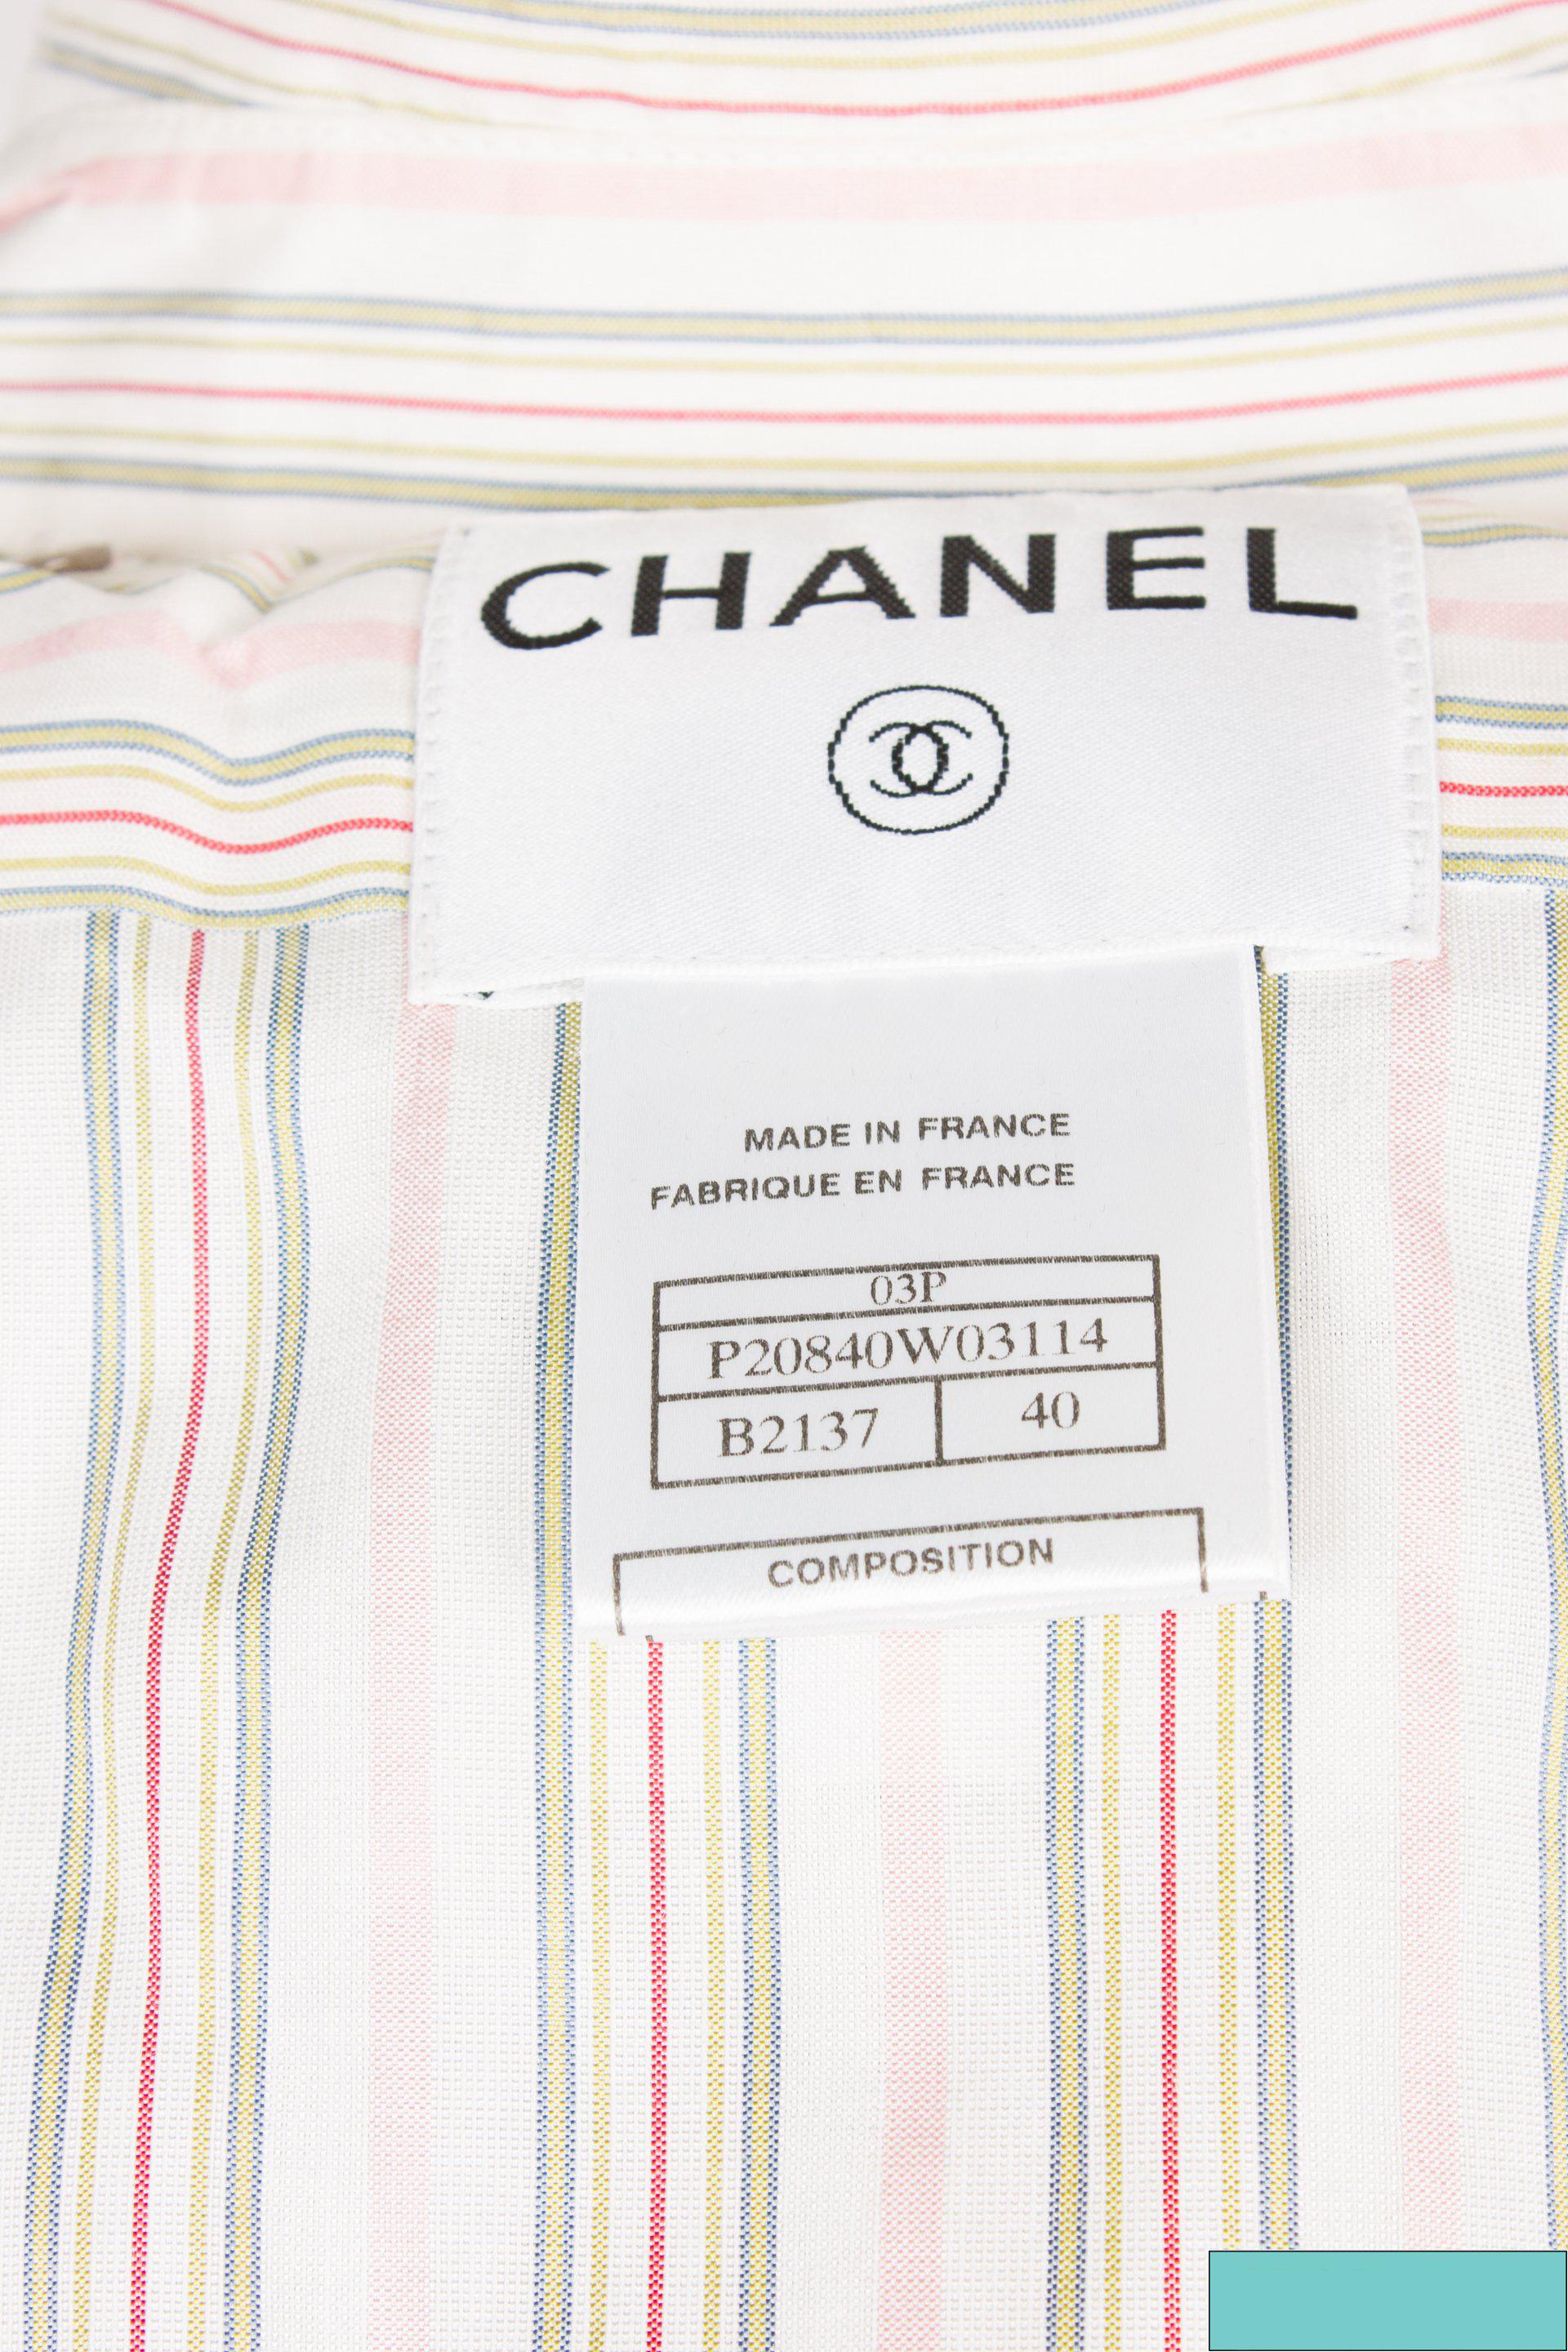 Chanel 3-pcs Suit Jacket, Skirt & Blouse - pink/green/gray/off-white 2003 In New Condition For Sale In Baarn, NL